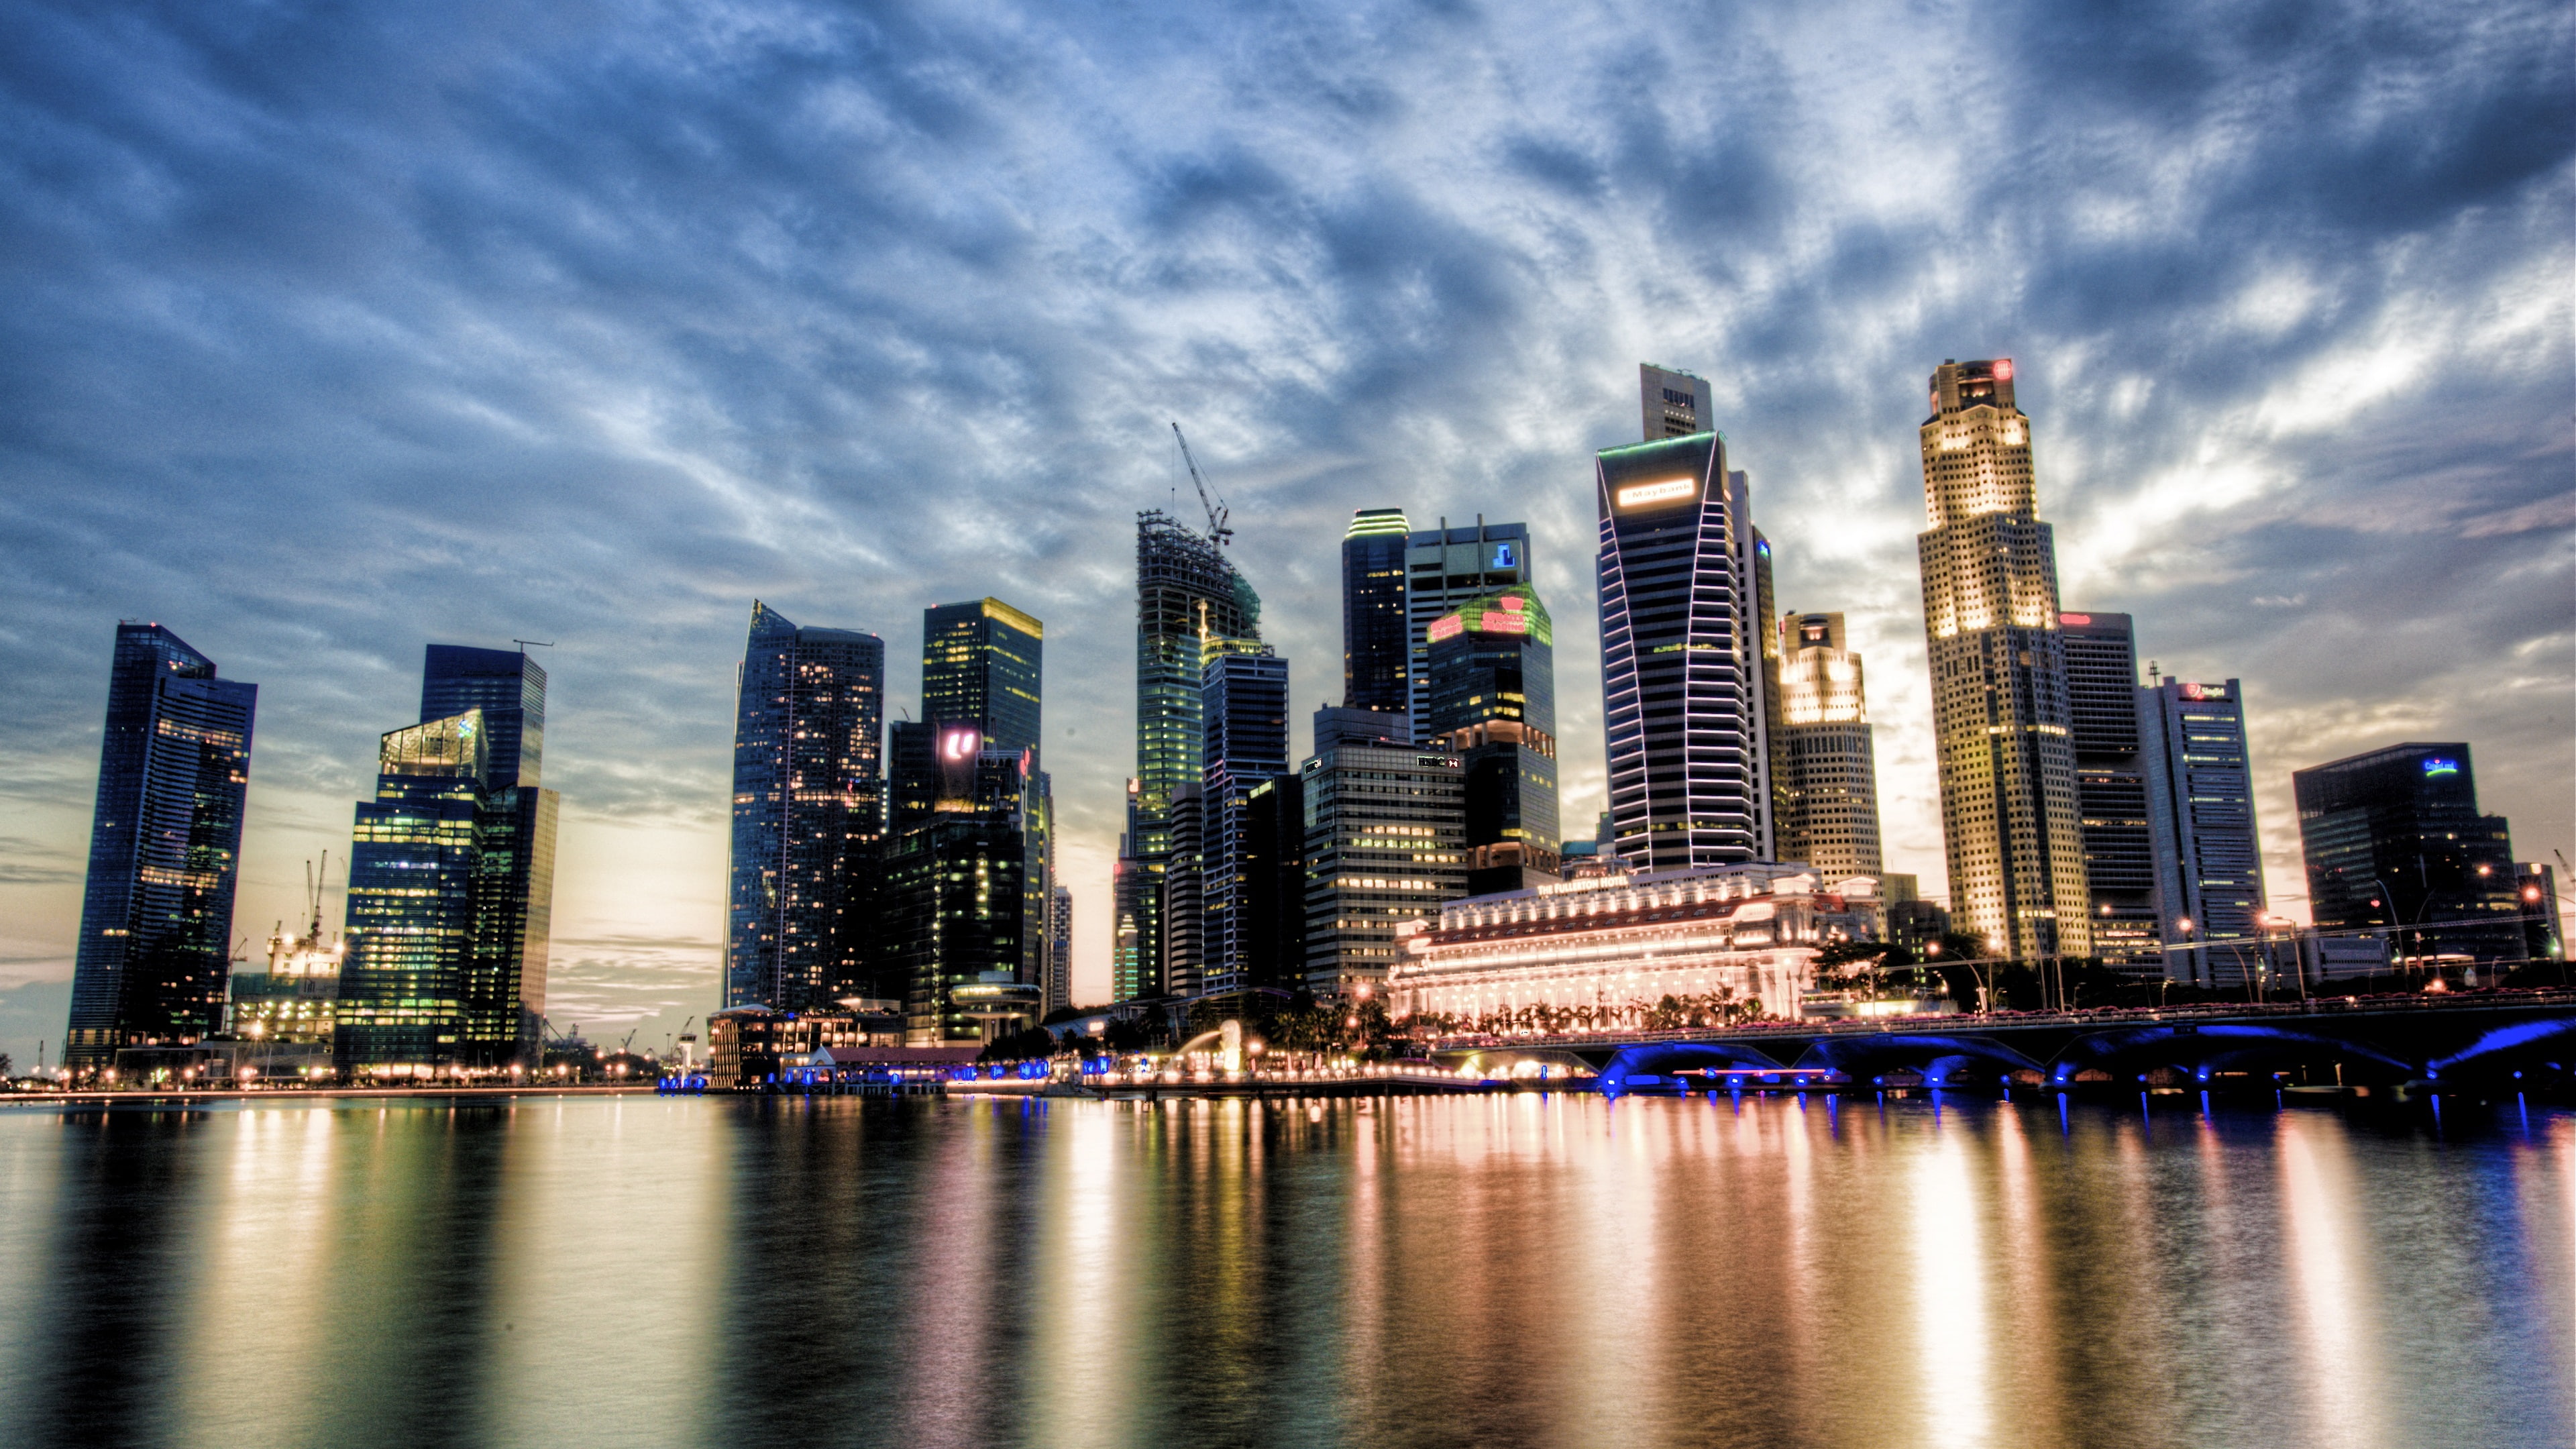 Singapore, city view, sunset, skyscrapers, clouds, river, water reflection